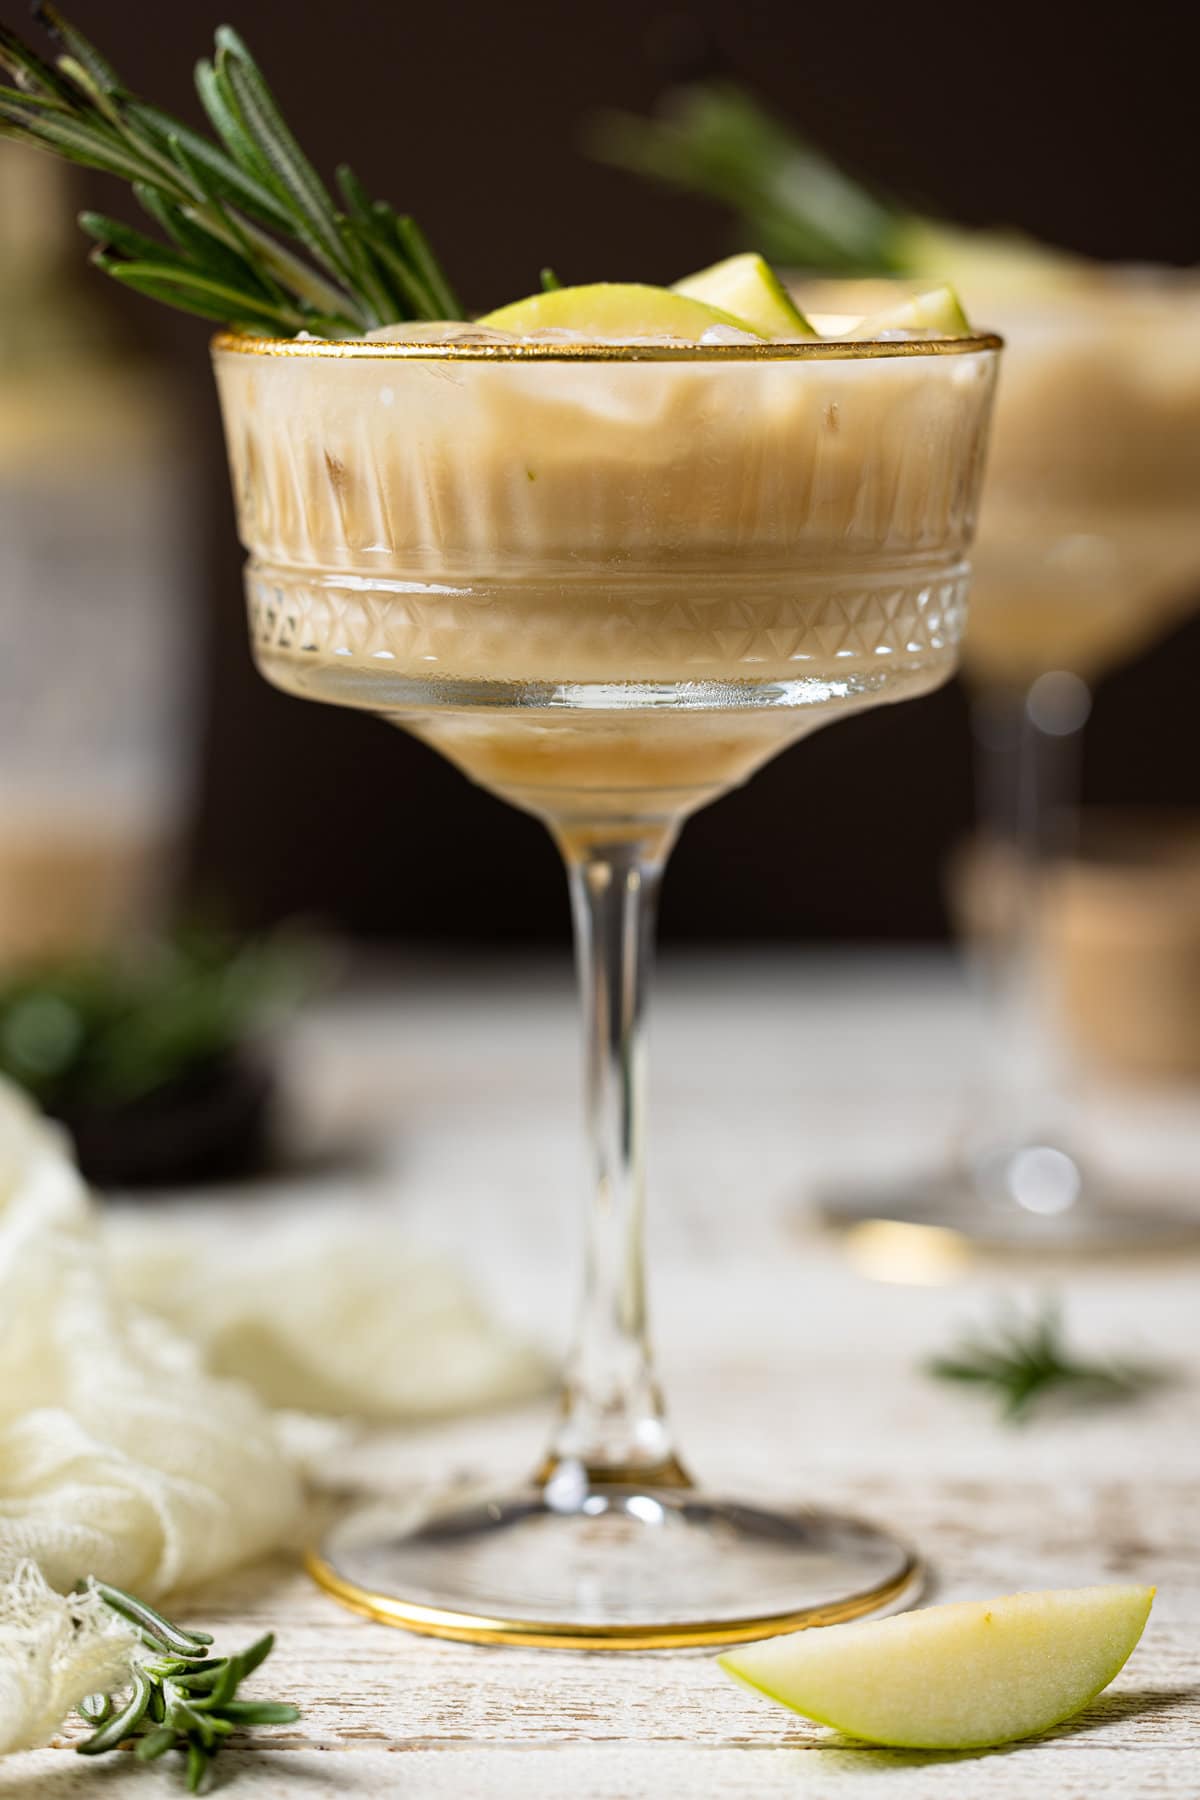 Apple Caramel Espresso Martini in a long-stemmed glass topped with a sprig of rosemary